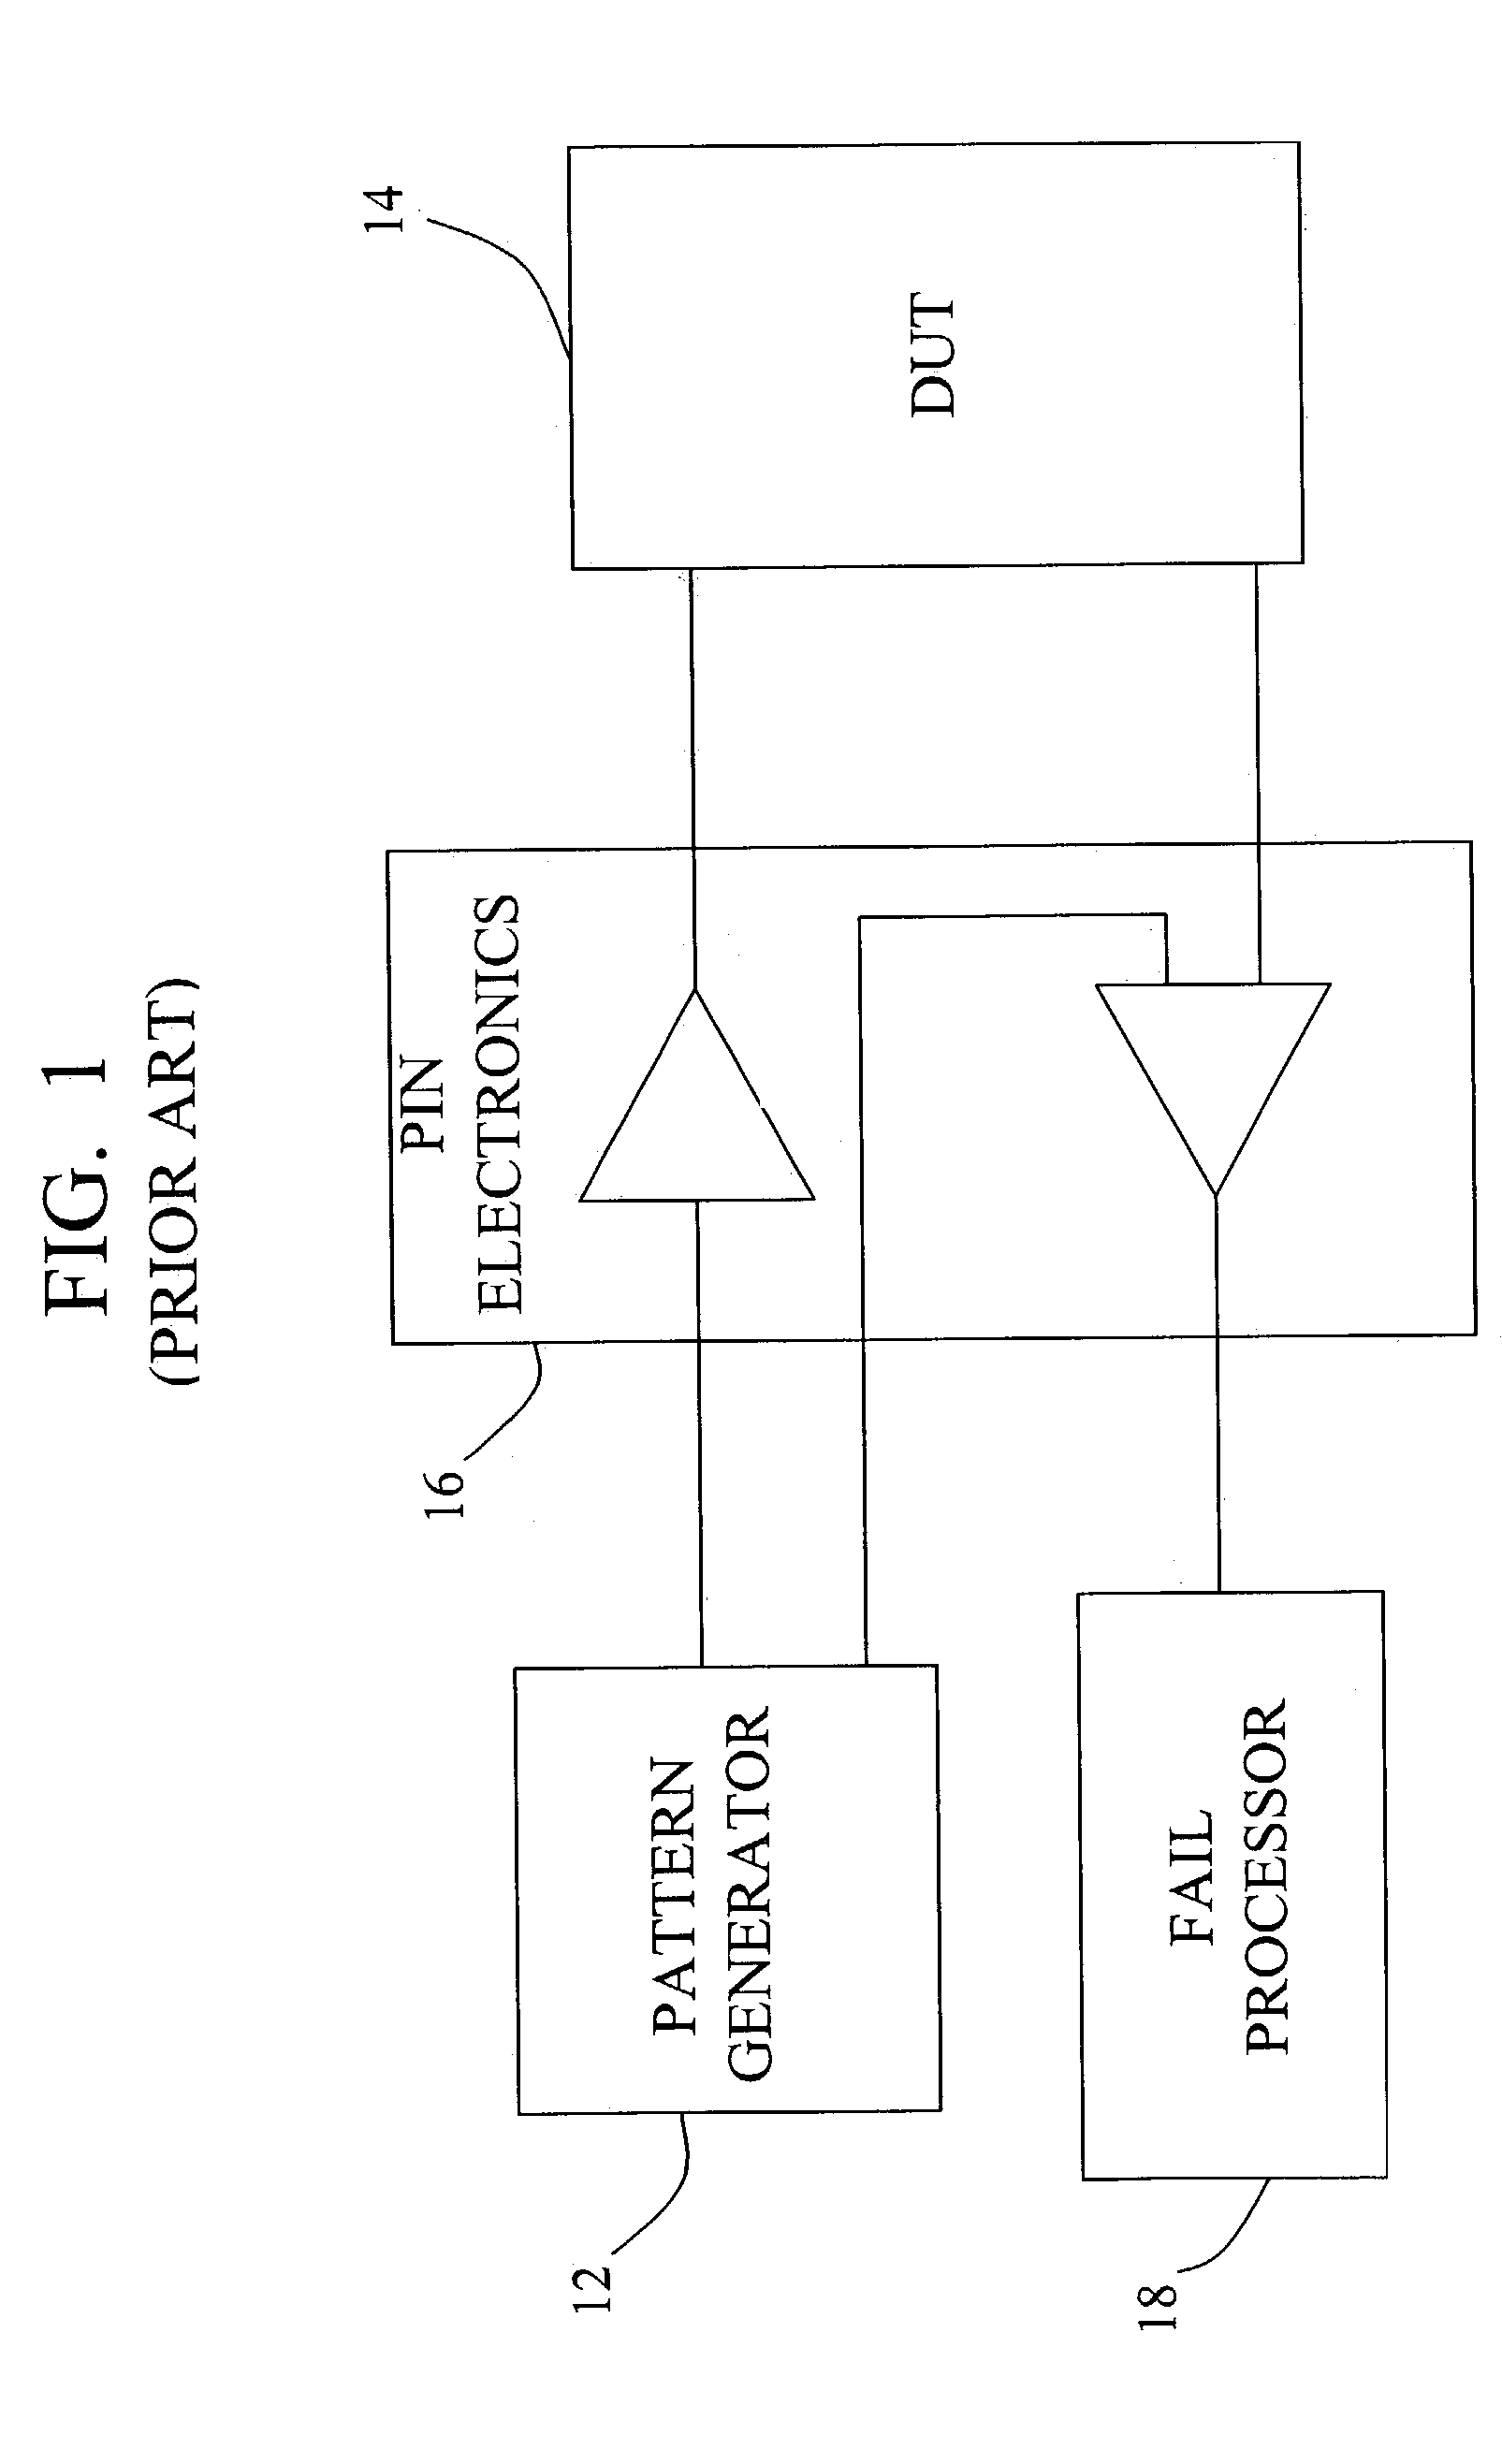 Apparatus and method for testing non-deterministic device data